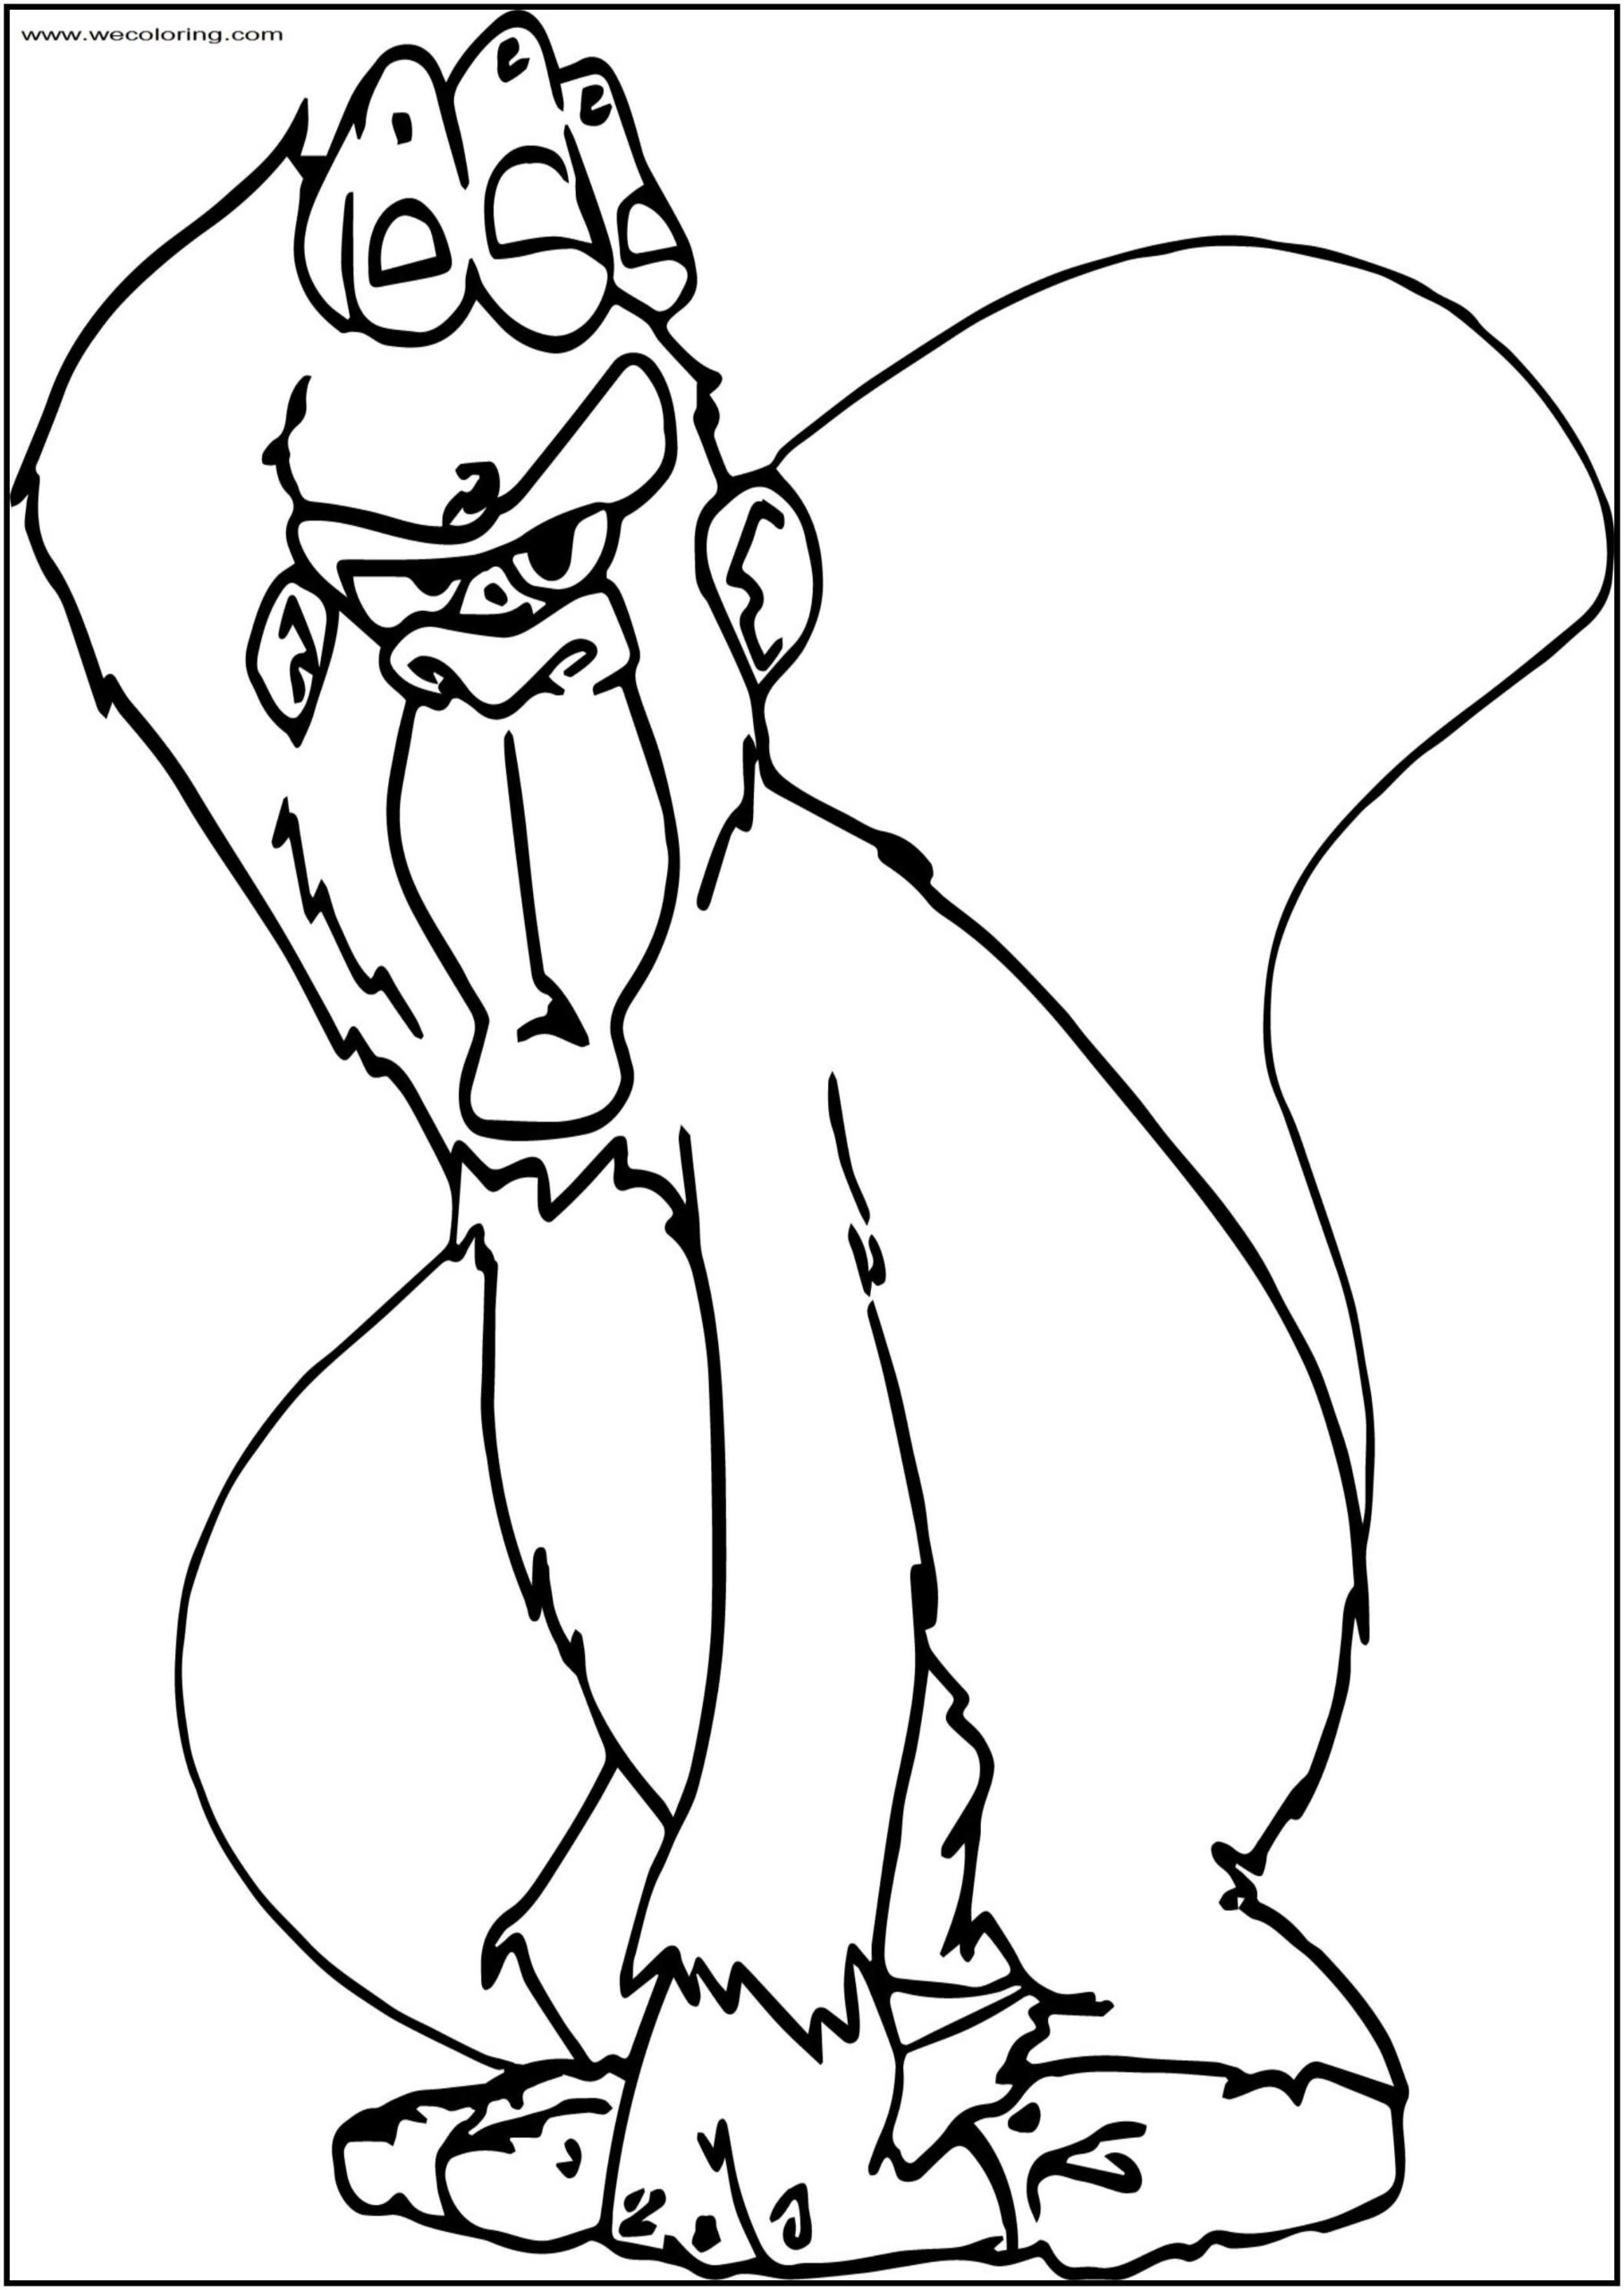 Coloring Pages : Free Printable Coloring For Gorillas Pusat Hobi ...